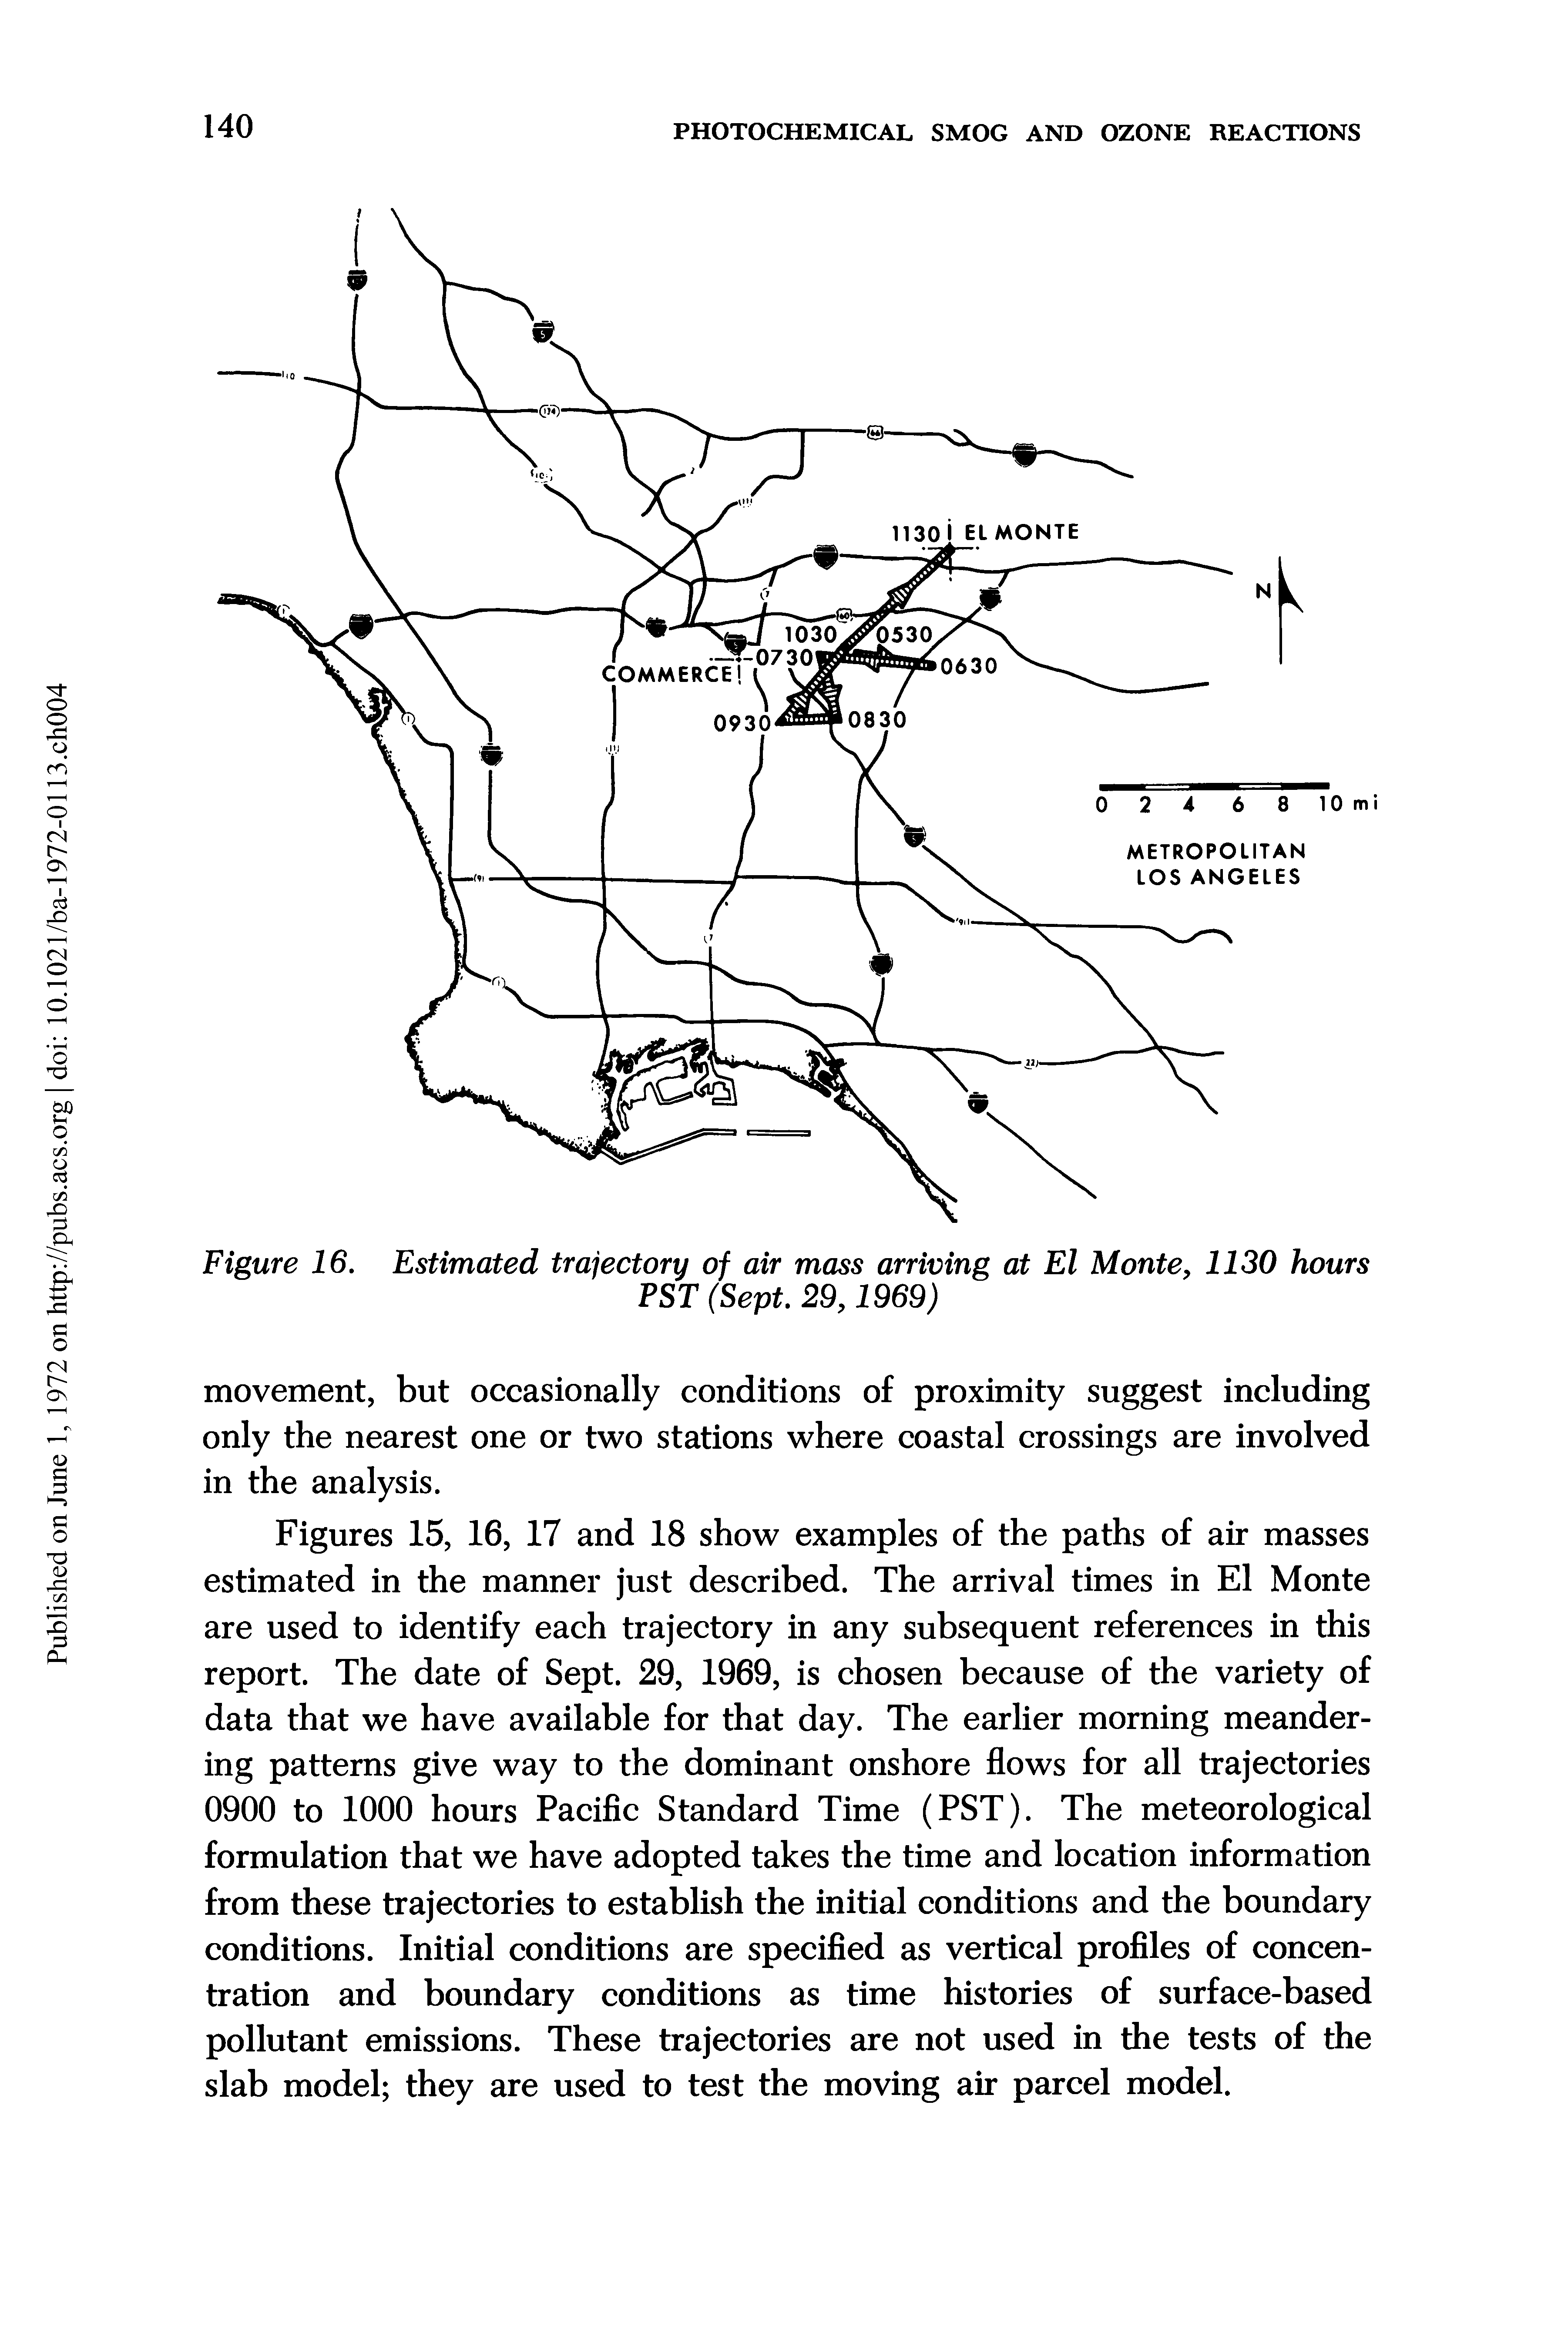 Figures 15, 16, 17 and 18 show examples of the paths of air masses estimated in the manner just described. The arrival times in El Monte are used to identify each trajectory in any subsequent references in this report. The date of Sept. 29, 1969, is chosen because of the variety of data that we have available for that day. The earlier morning meandering patterns give way to the dominant onshore flows for all trajectories 0900 to 1000 hours Pacific Standard Time (PST). The meteorological formulation that we have adopted takes the time and location information from these trajectories to establish the initial conditions and the boundary conditions. Initial conditions are specified as vertical profiles of concentration and boundary conditions as time histories of surface-based pollutant emissions. These trajectories are not used in the tests of the slab model they are used to test the moving air parcel model.